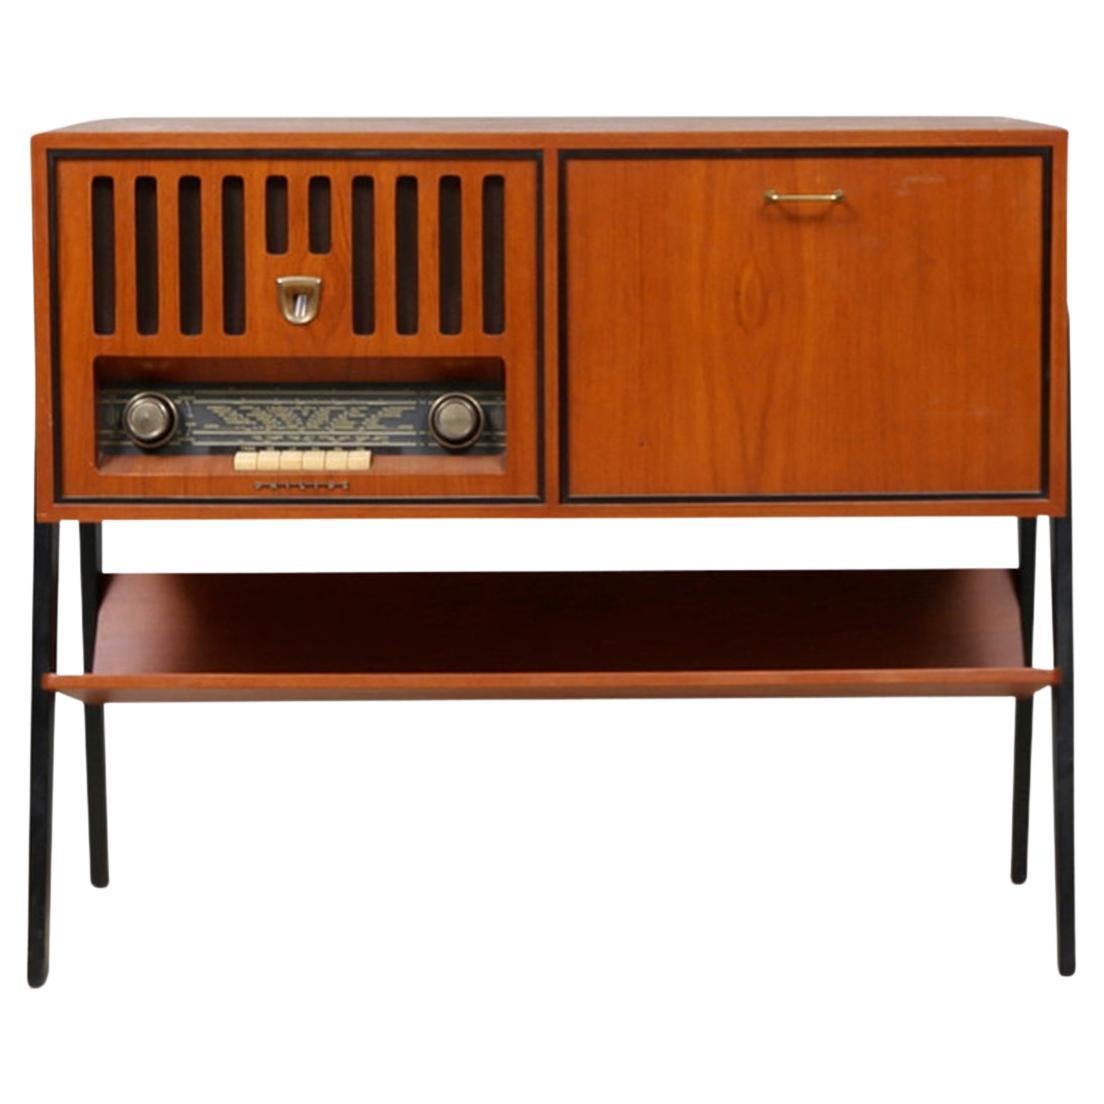 Philips Type FS 665 a Record Console in Teak